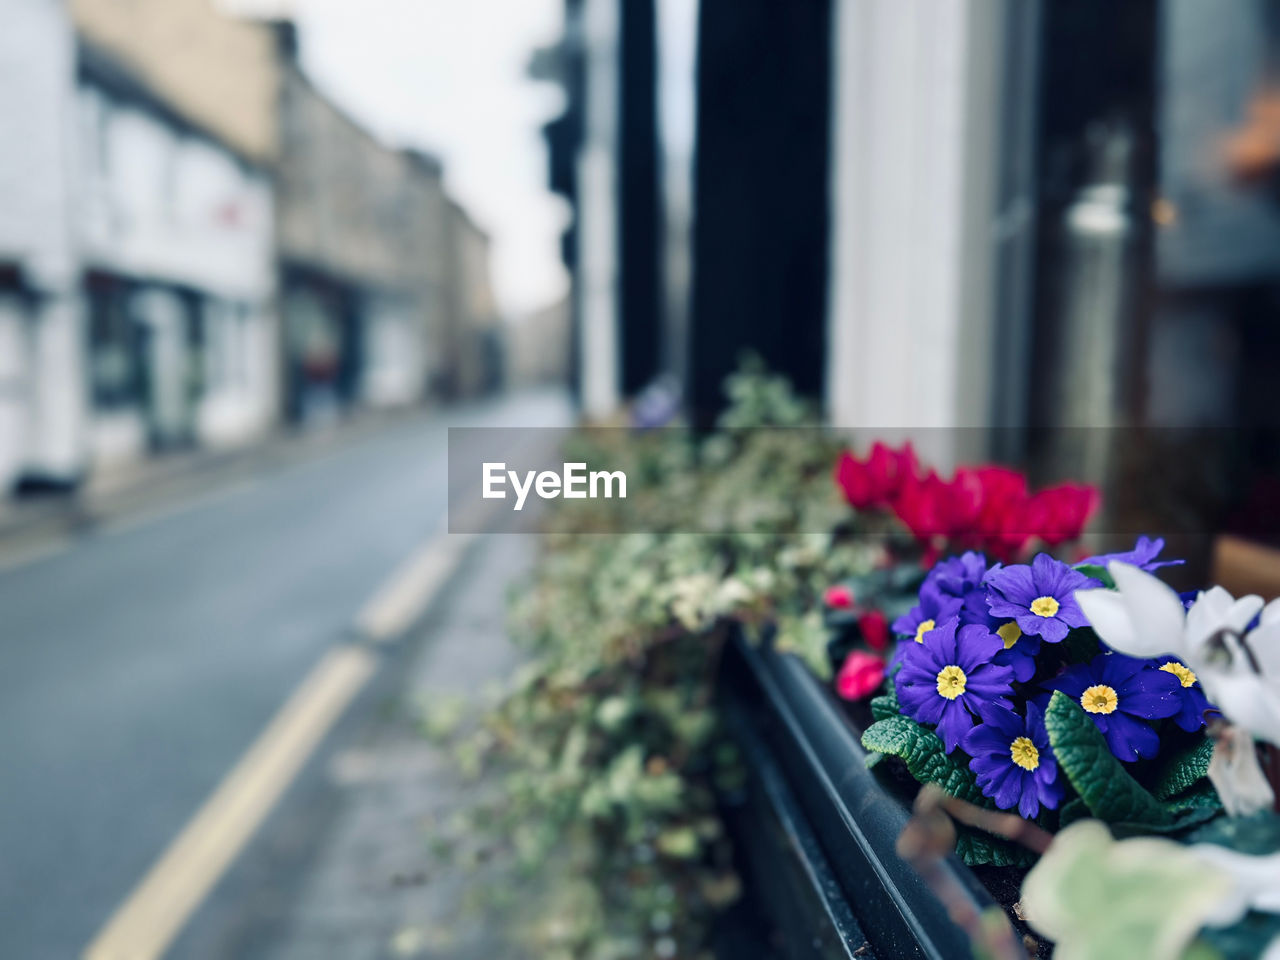 flower, flowering plant, plant, nature, freshness, city, beauty in nature, architecture, street, day, fragility, transportation, outdoors, spring, flower arrangement, close-up, building exterior, selective focus, no people, focus on foreground, road, bouquet, built structure